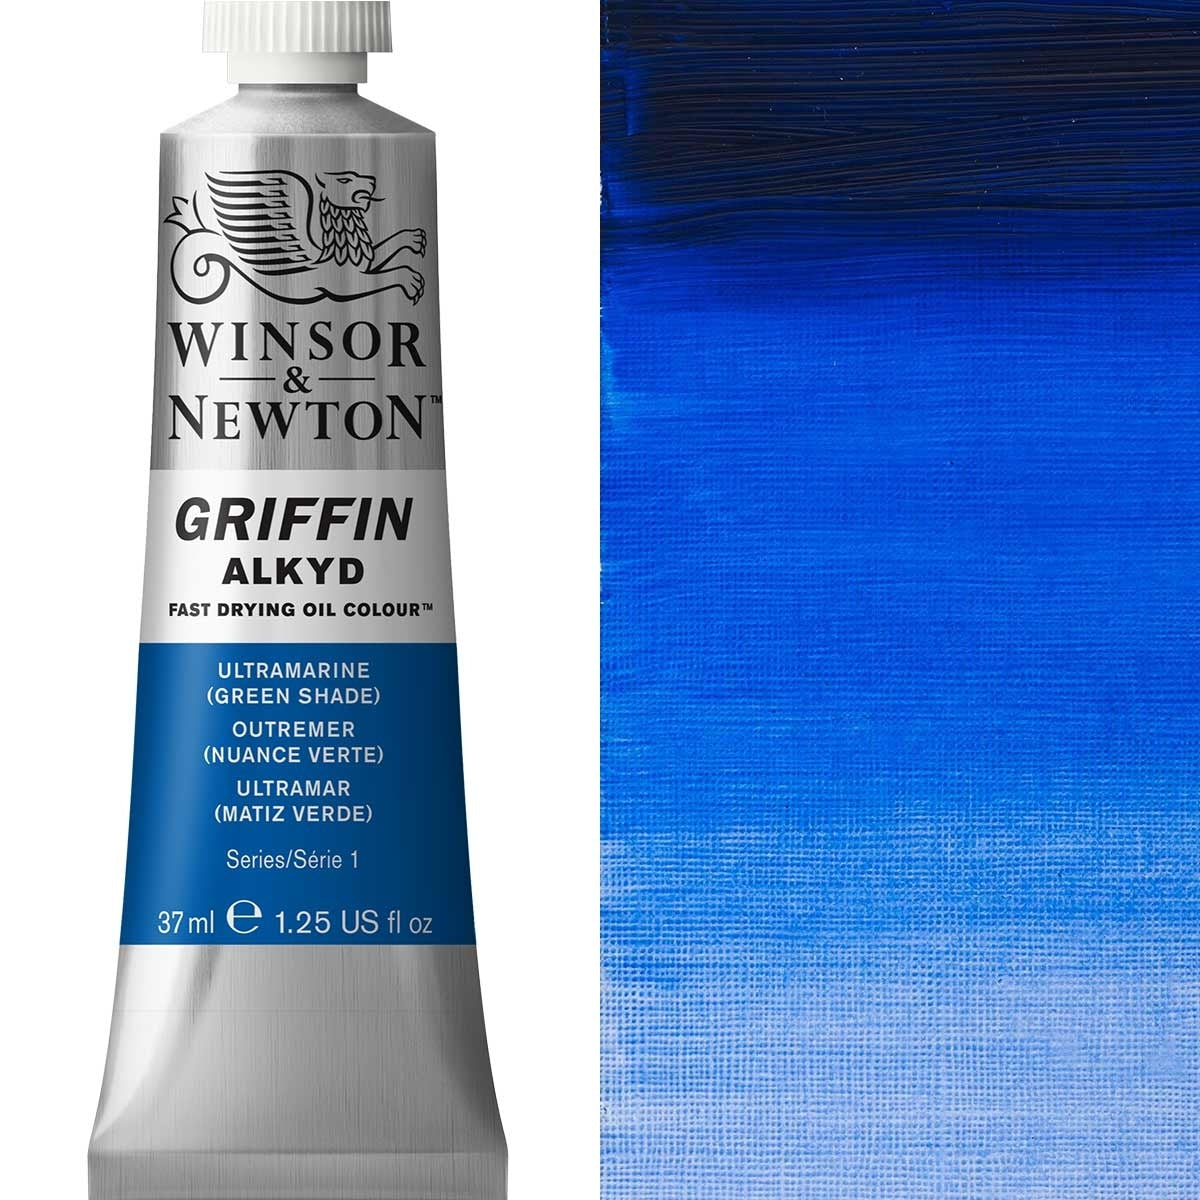 Winsor and Newton - Griffin ALKYD Oil Colour - 37ml - Ultramarine Green